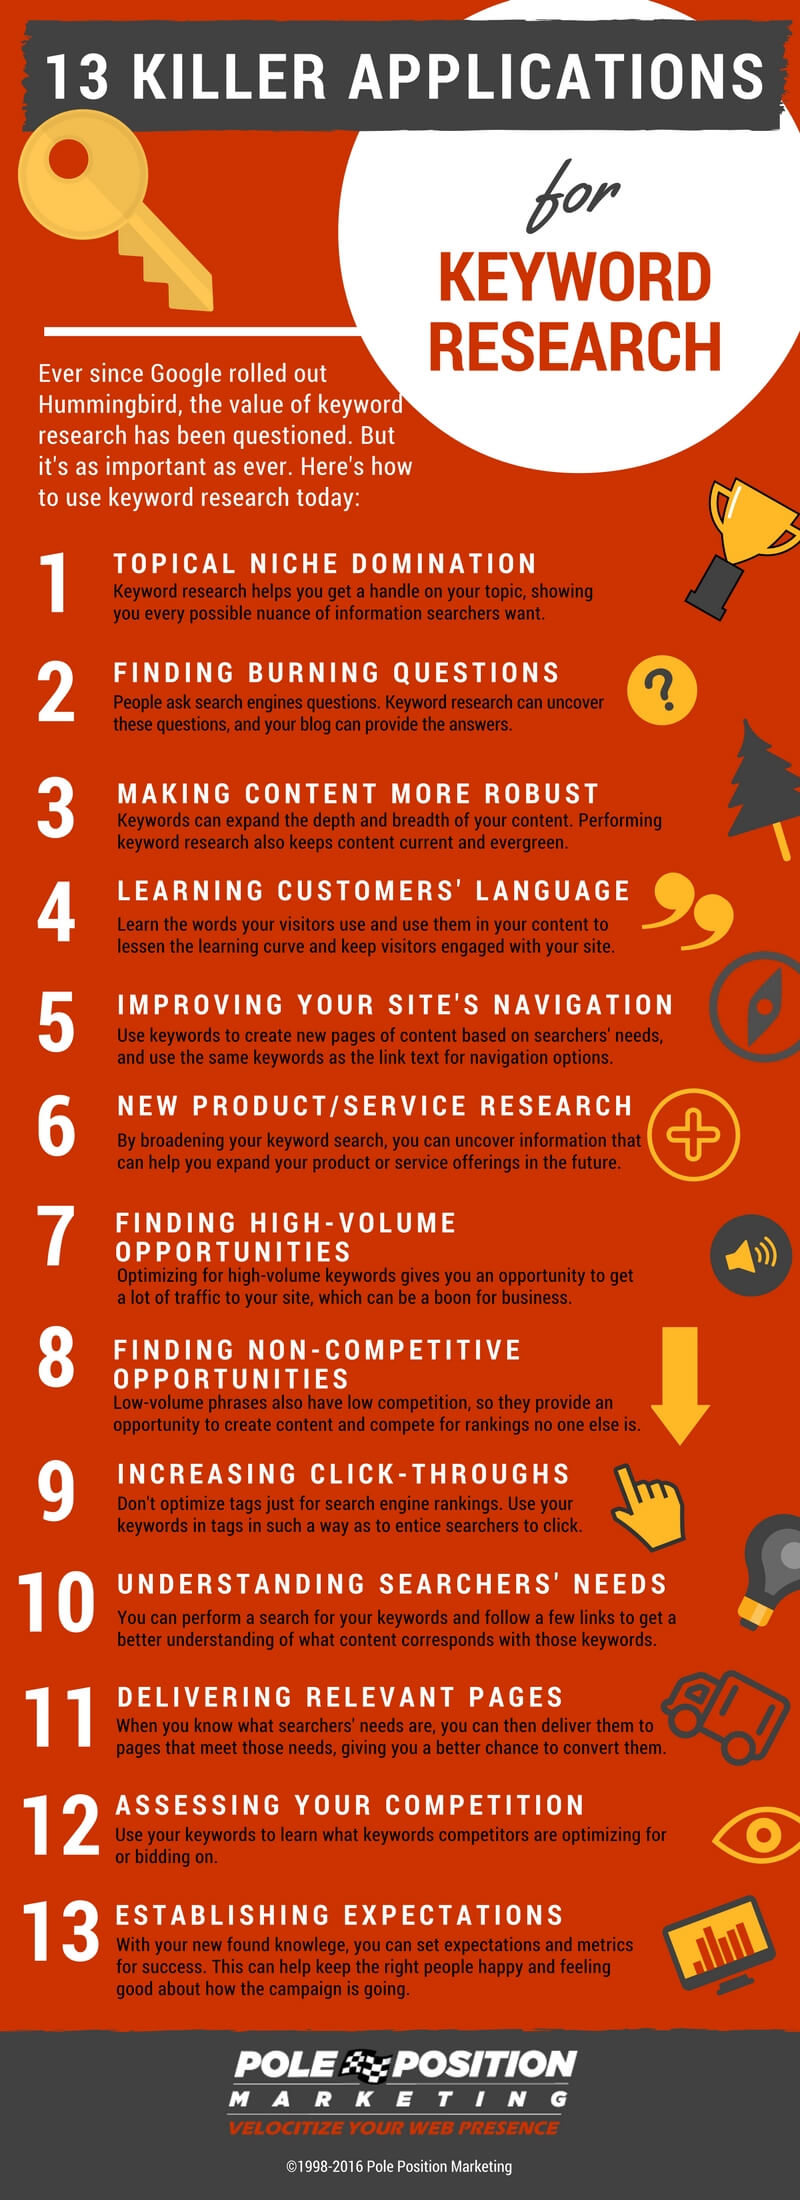 reasons-to-do-keyword-research-infographic-1